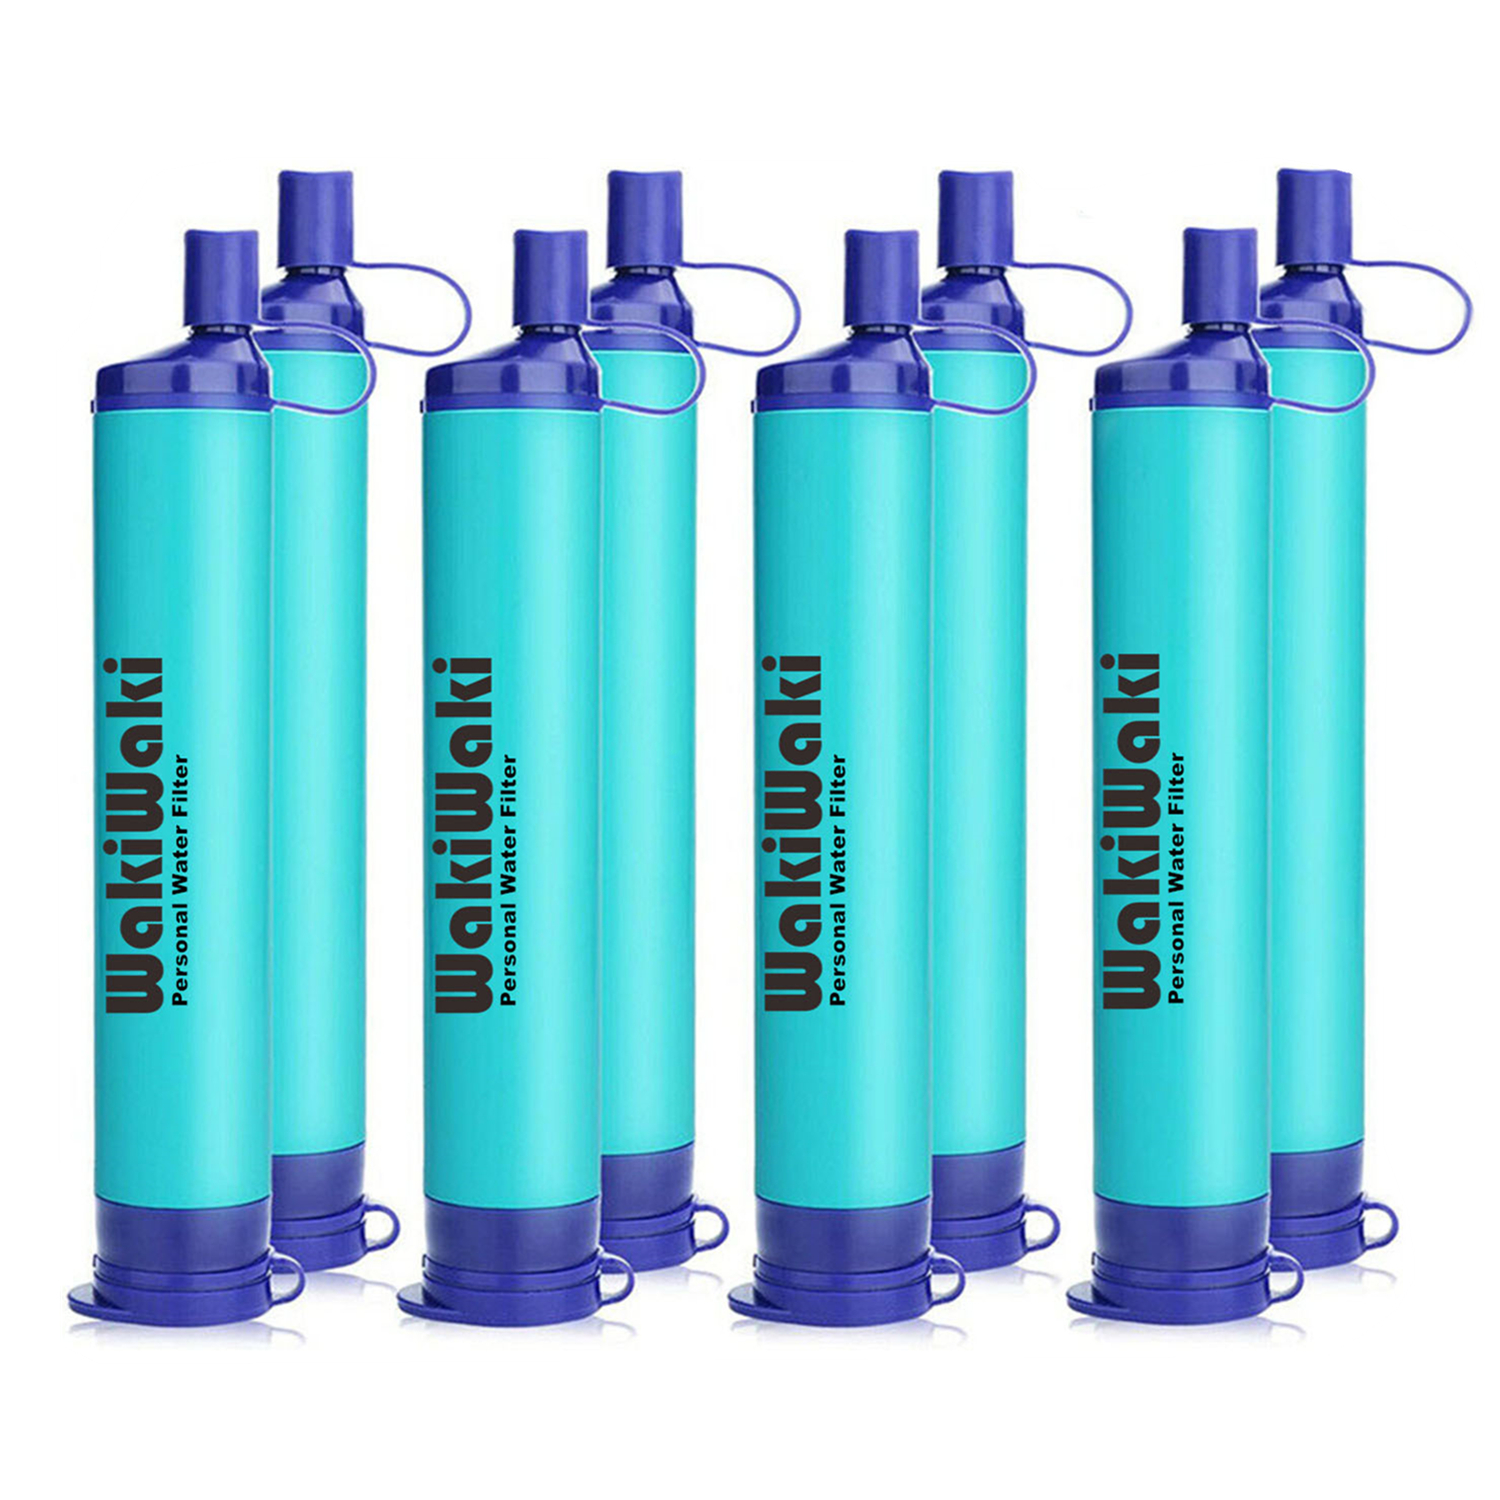 6Pack Survival Water Filter Straw Outdoor Camping Hiking Drinking Emergency Gear